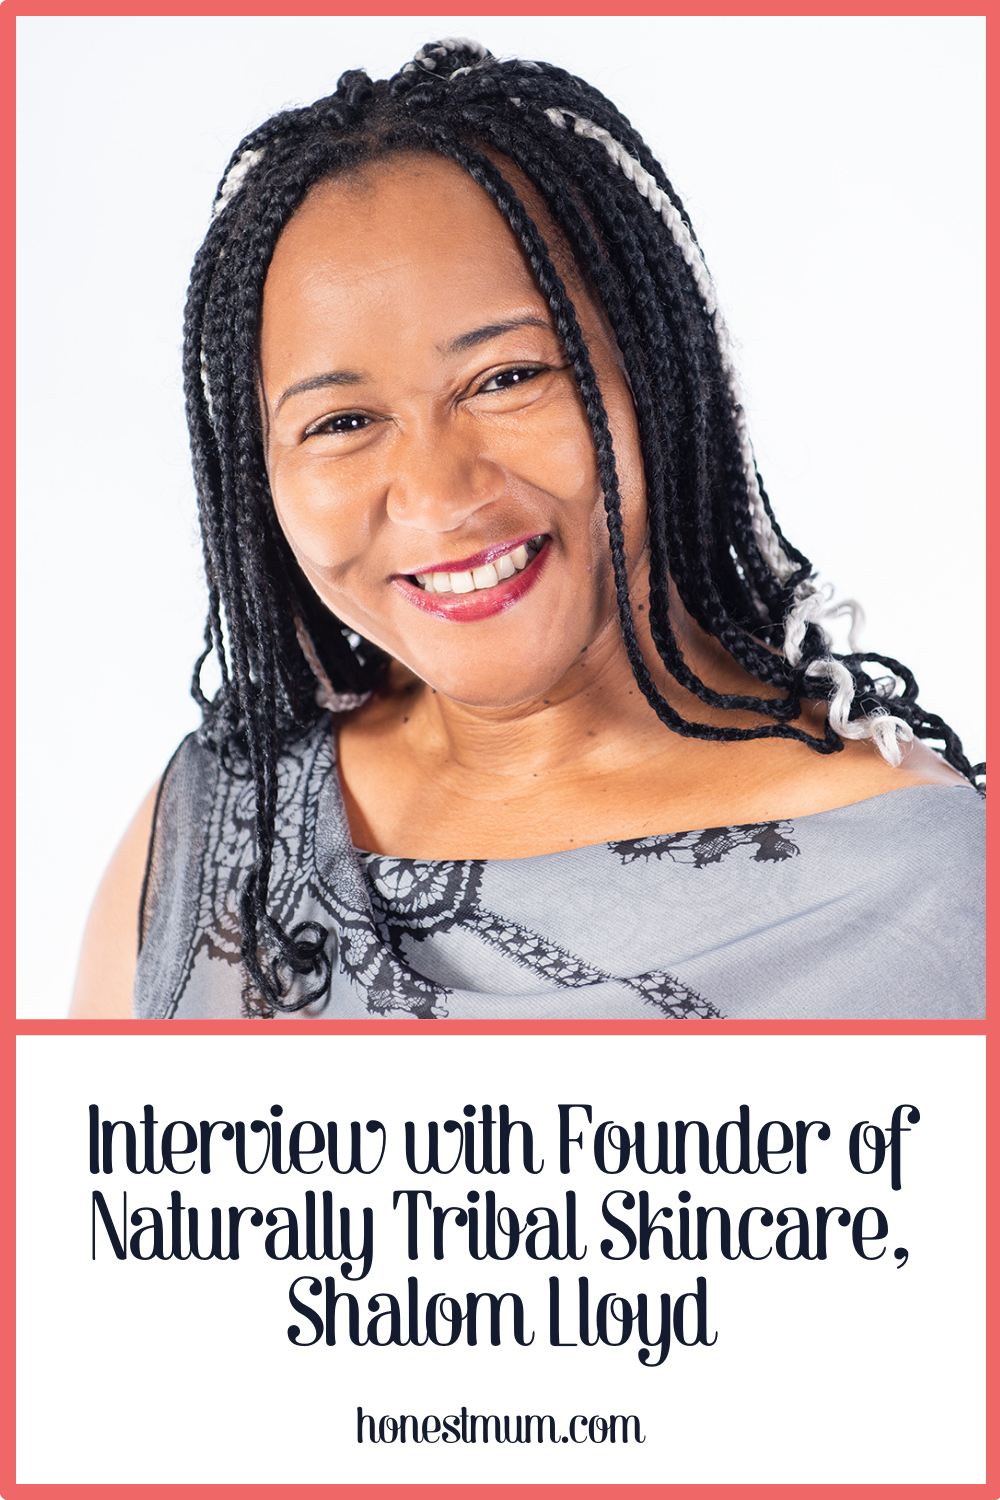 Interview With Founder Of Naturally Tribal Skincare, Shalom Lloyd